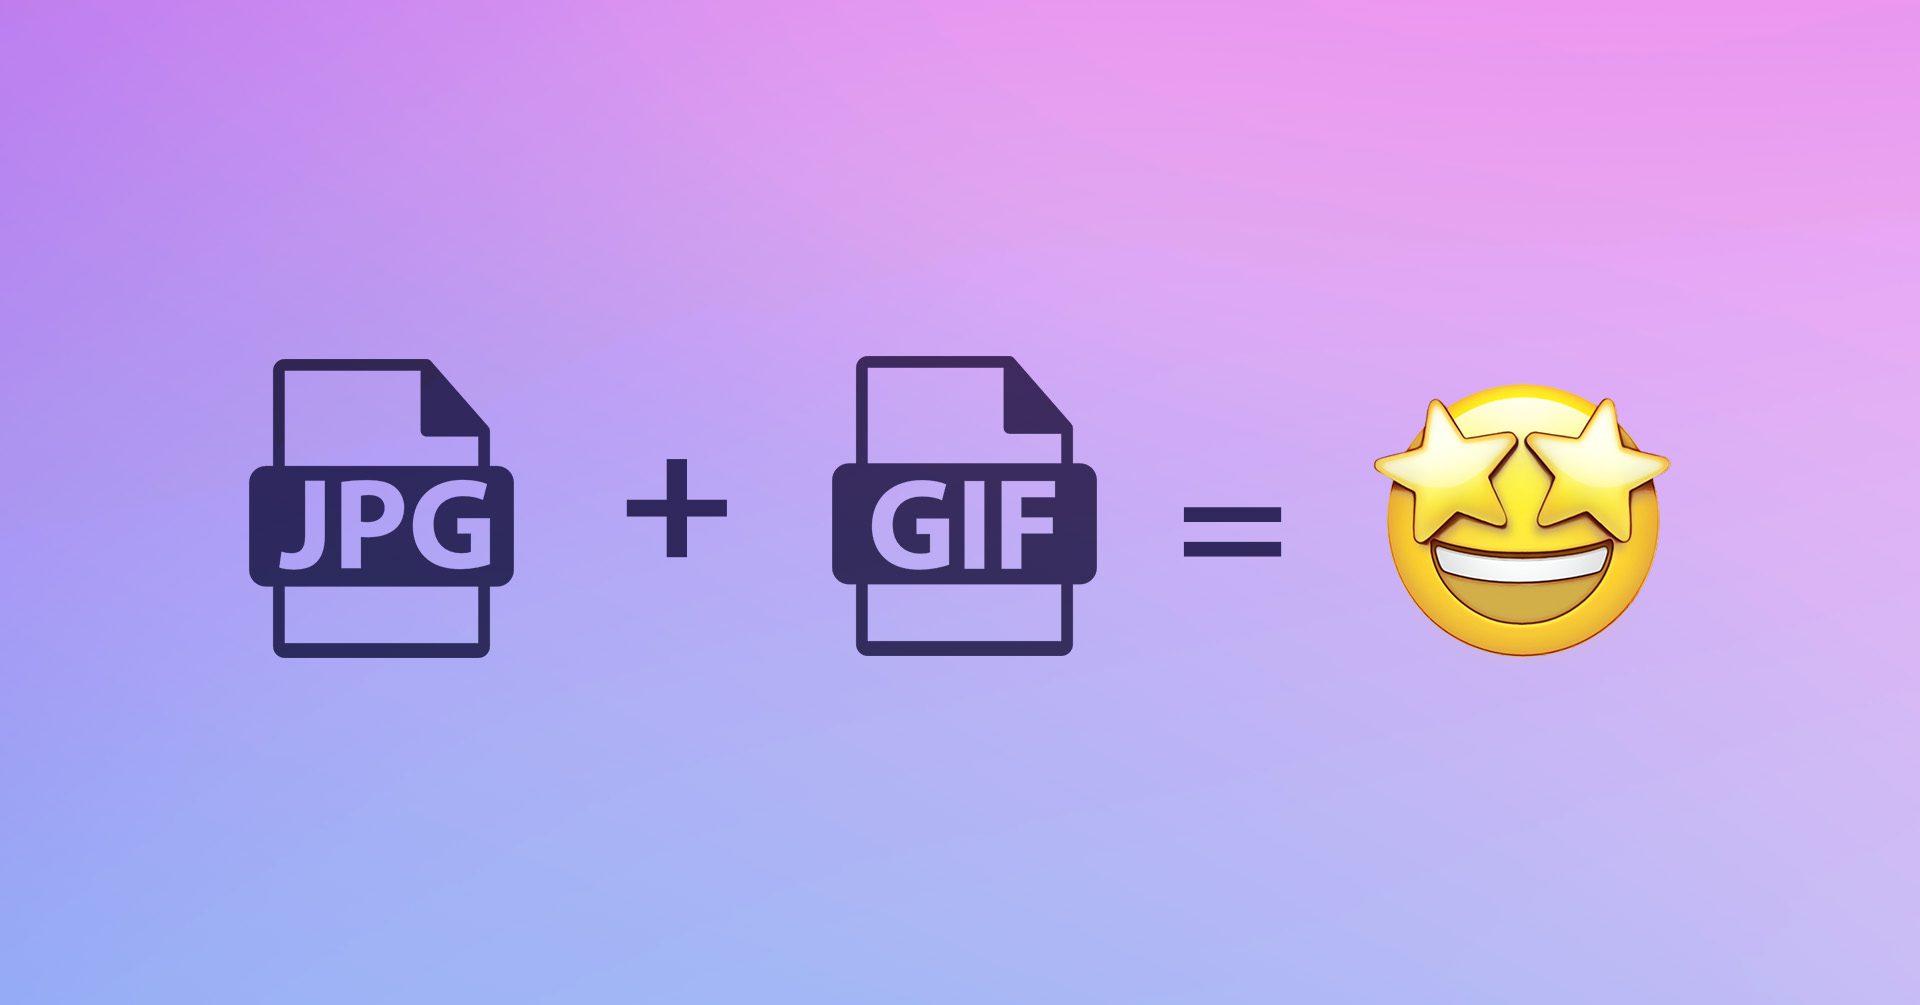 How to Make a High Resolution GIF in Perfect Quality